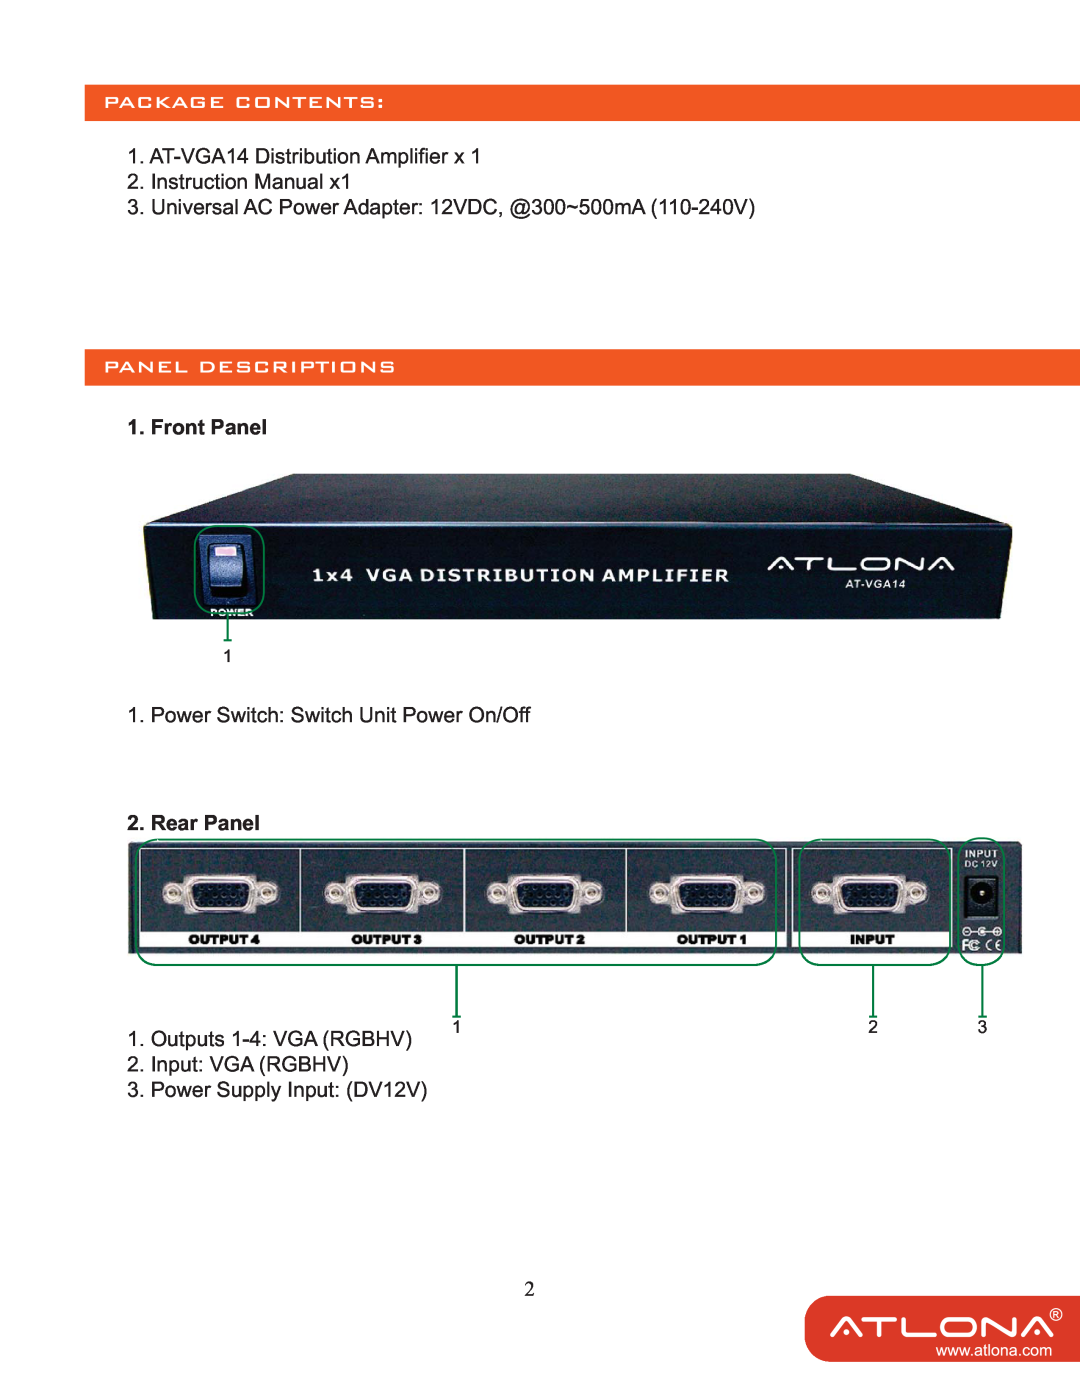 Atlona AT-VGA14 user manual Package Contents, Panel Descriptions, Front Panel, Rear Panel 